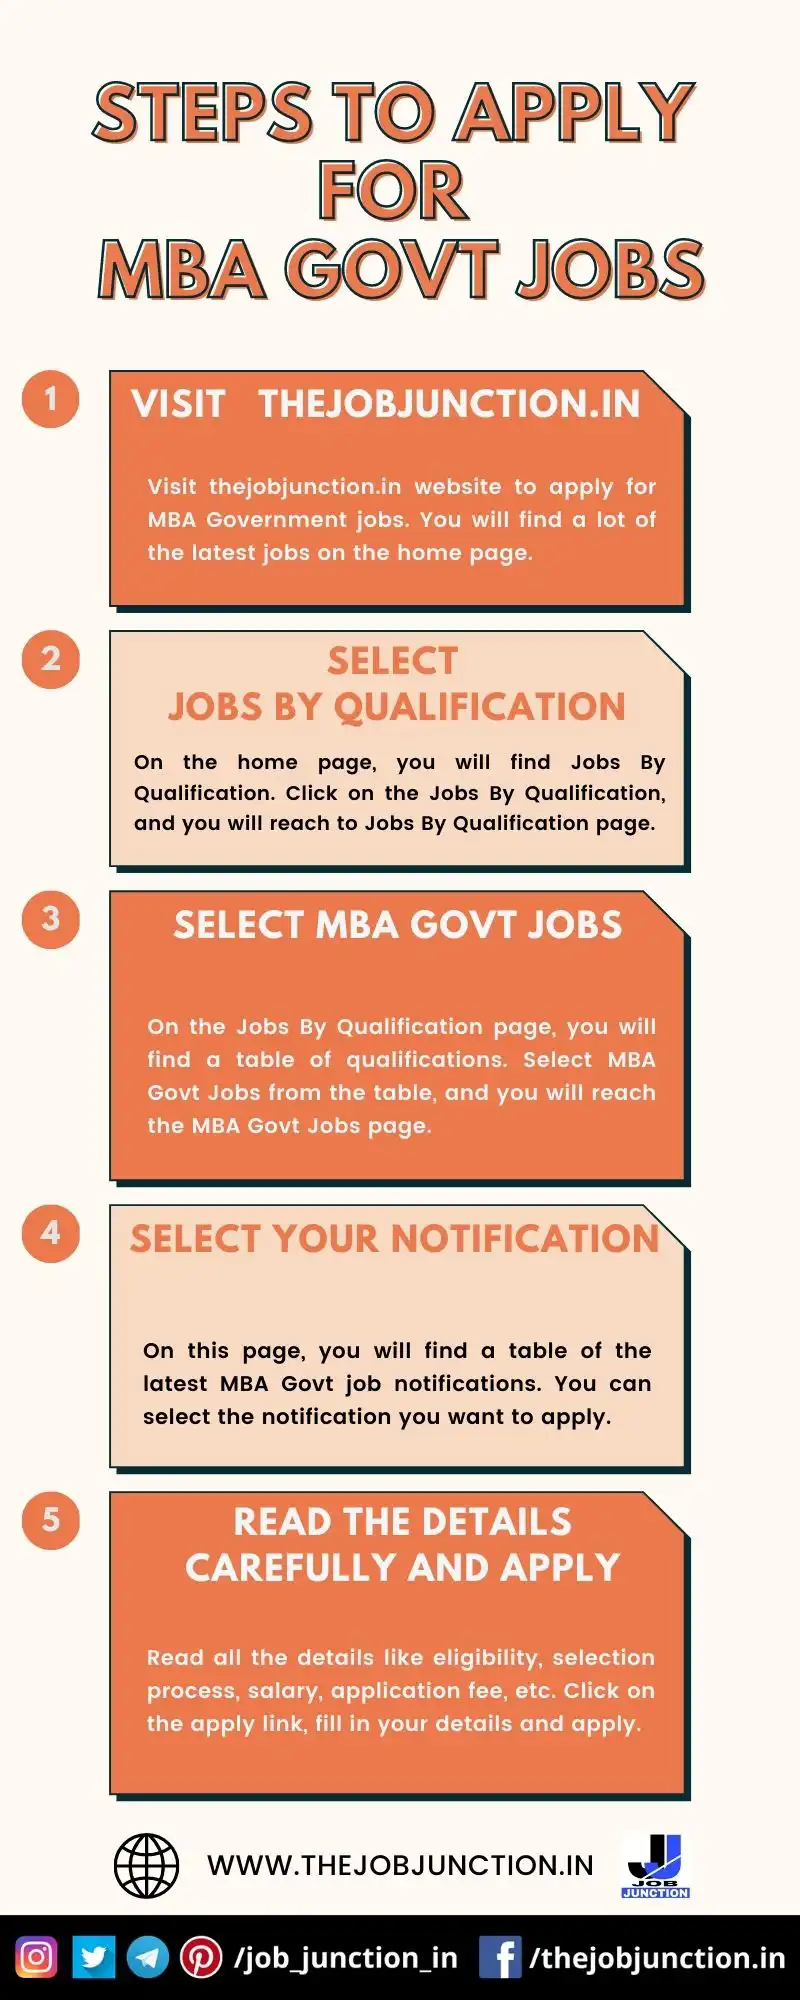 STEPS TO APPLY FOR MBA GOVT JOBS